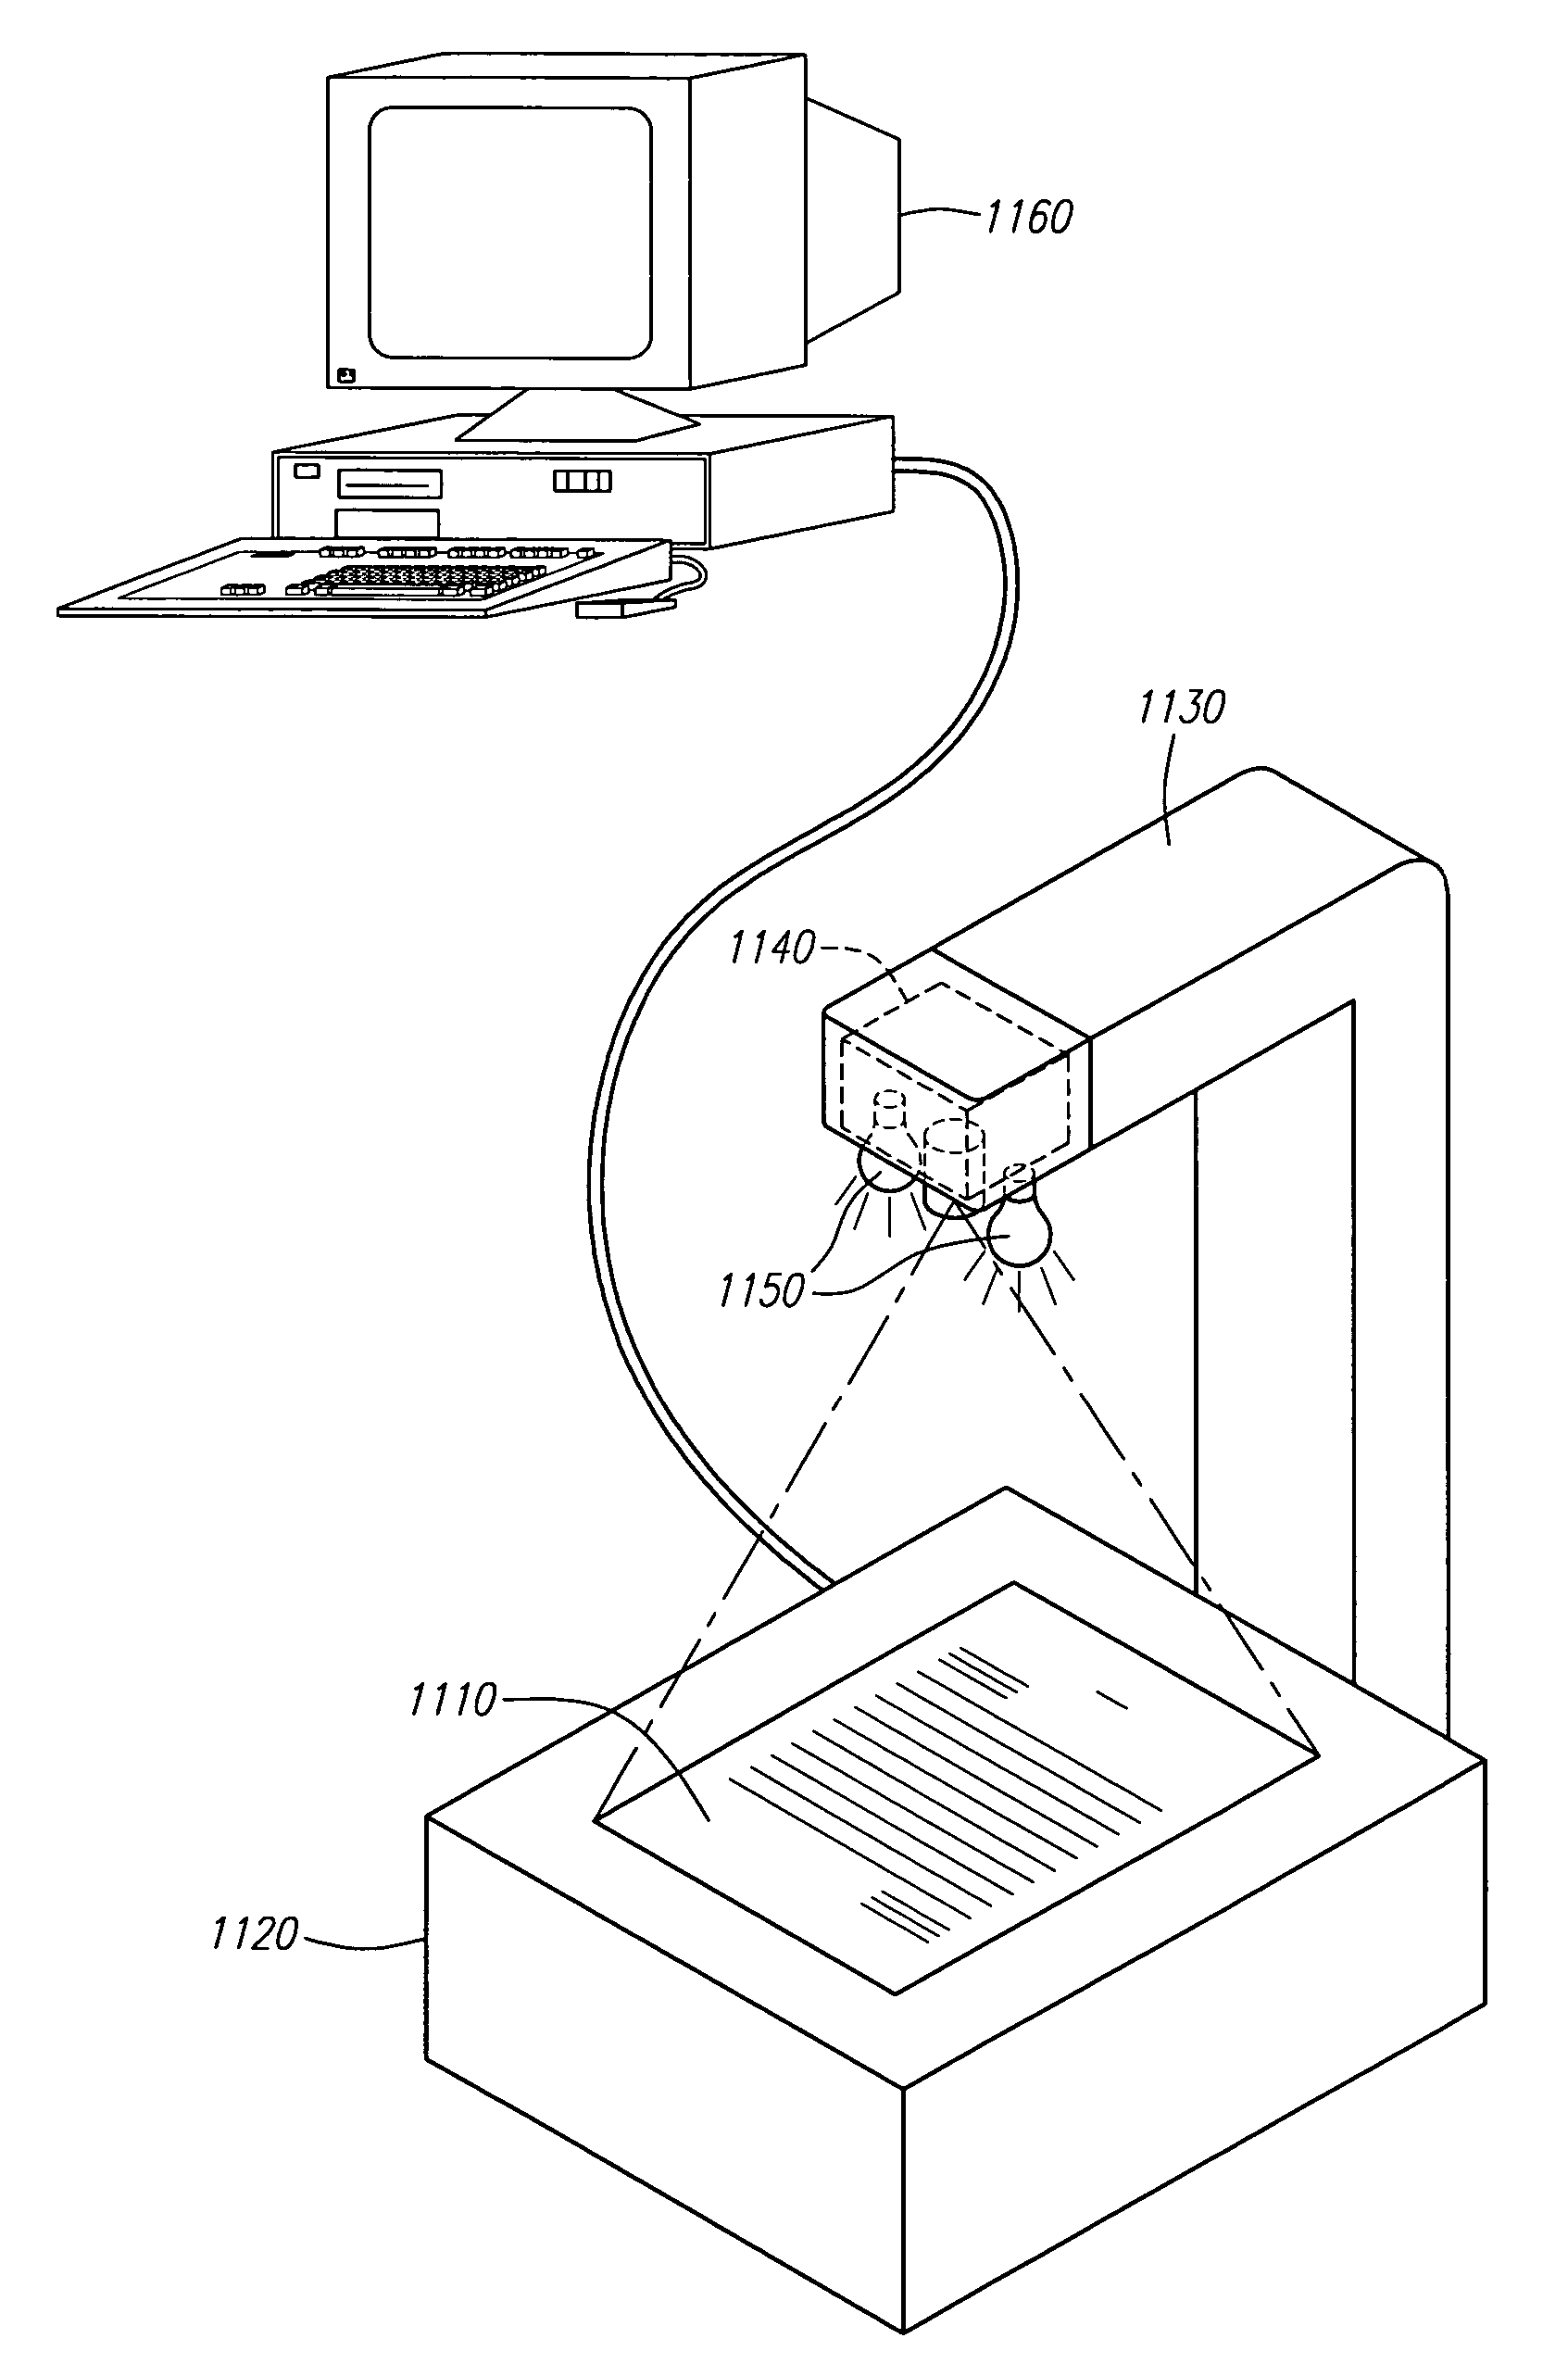 Photographic document imaging system